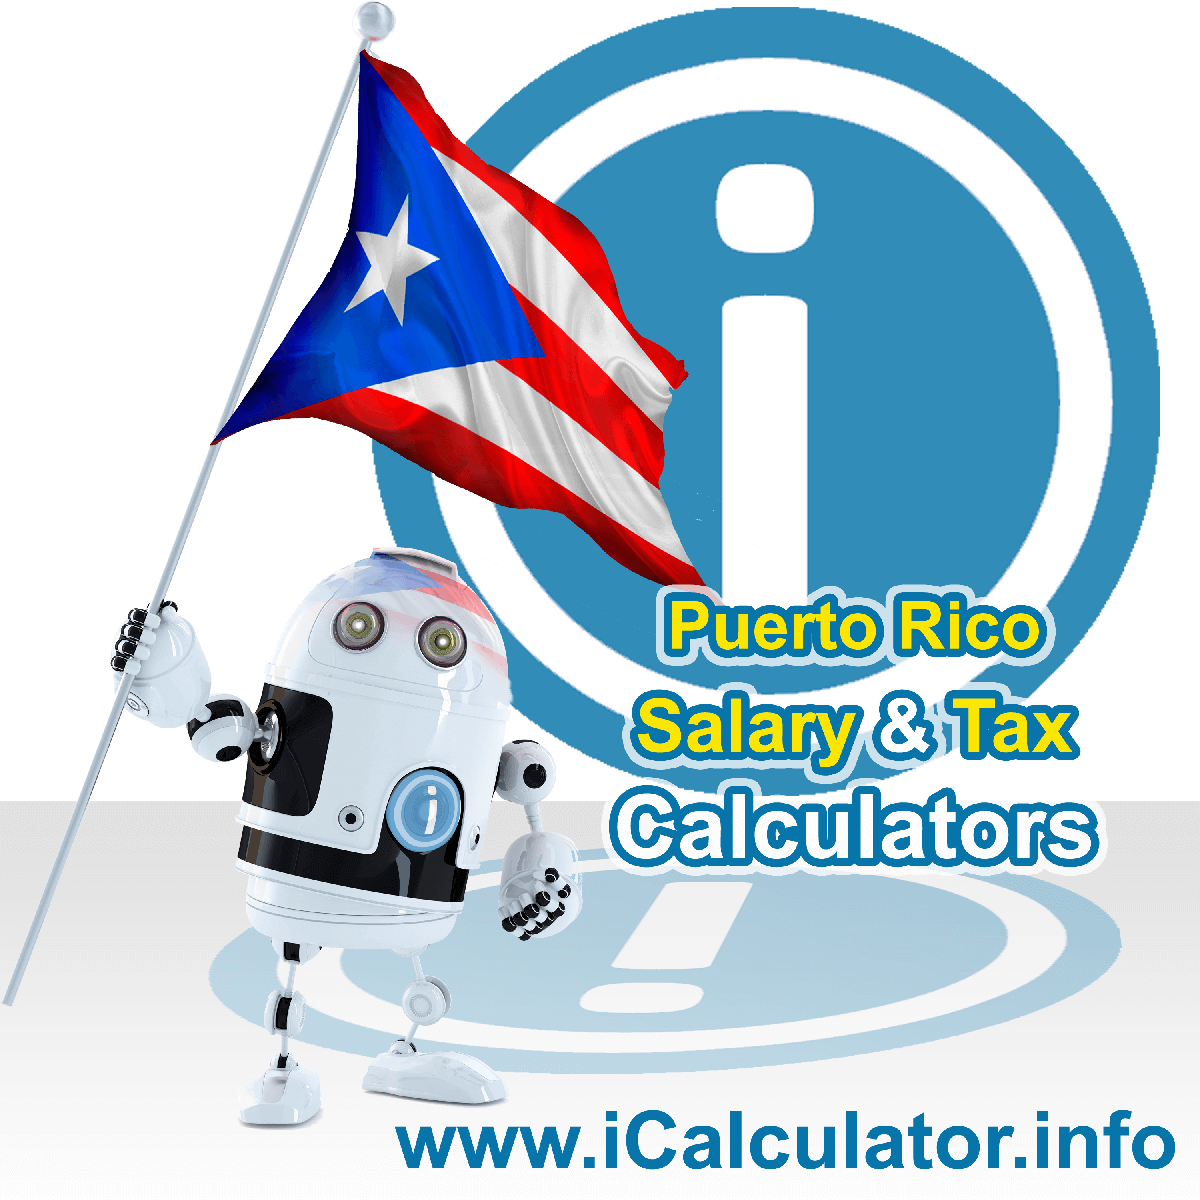 Puerto Rico Wage Calculator. This image shows the Puerto Rico flag and information relating to the tax formula for the Puerto Rico Tax Calculator